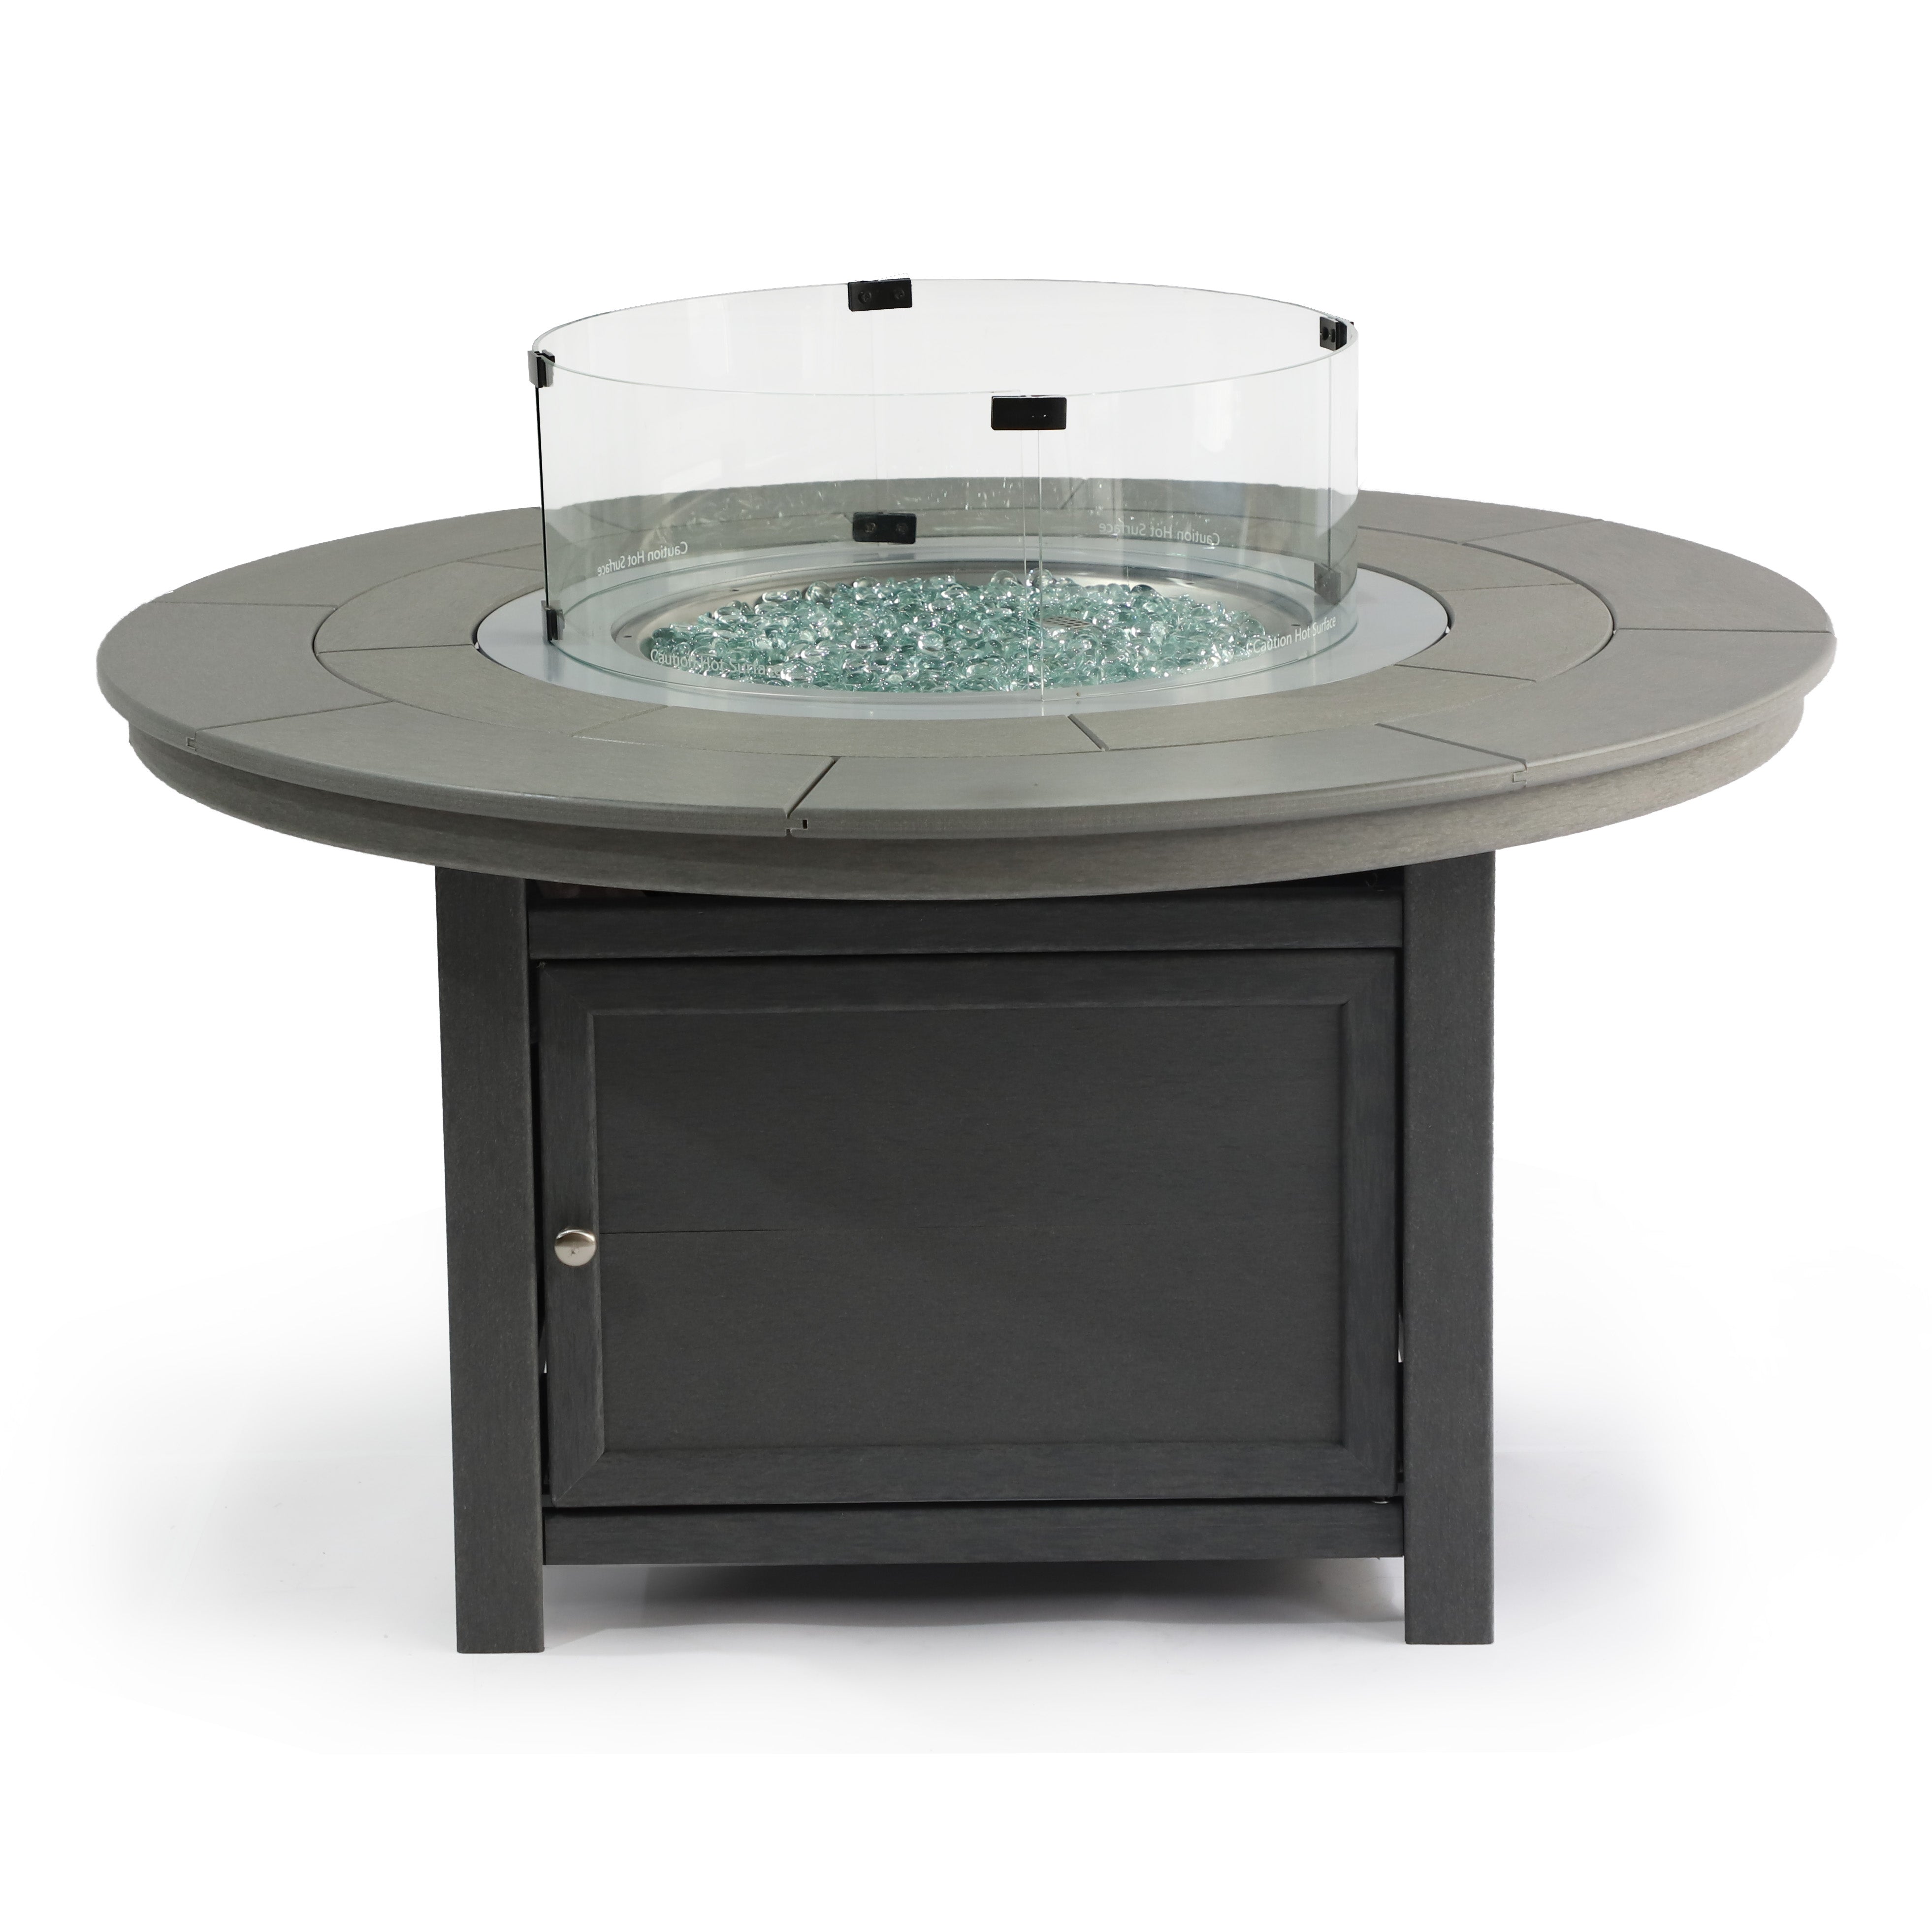 LuXeo Vail 25"(H) x 48"(W) Round Poly FirePit Table with Glass Flame-Wind Guard SET